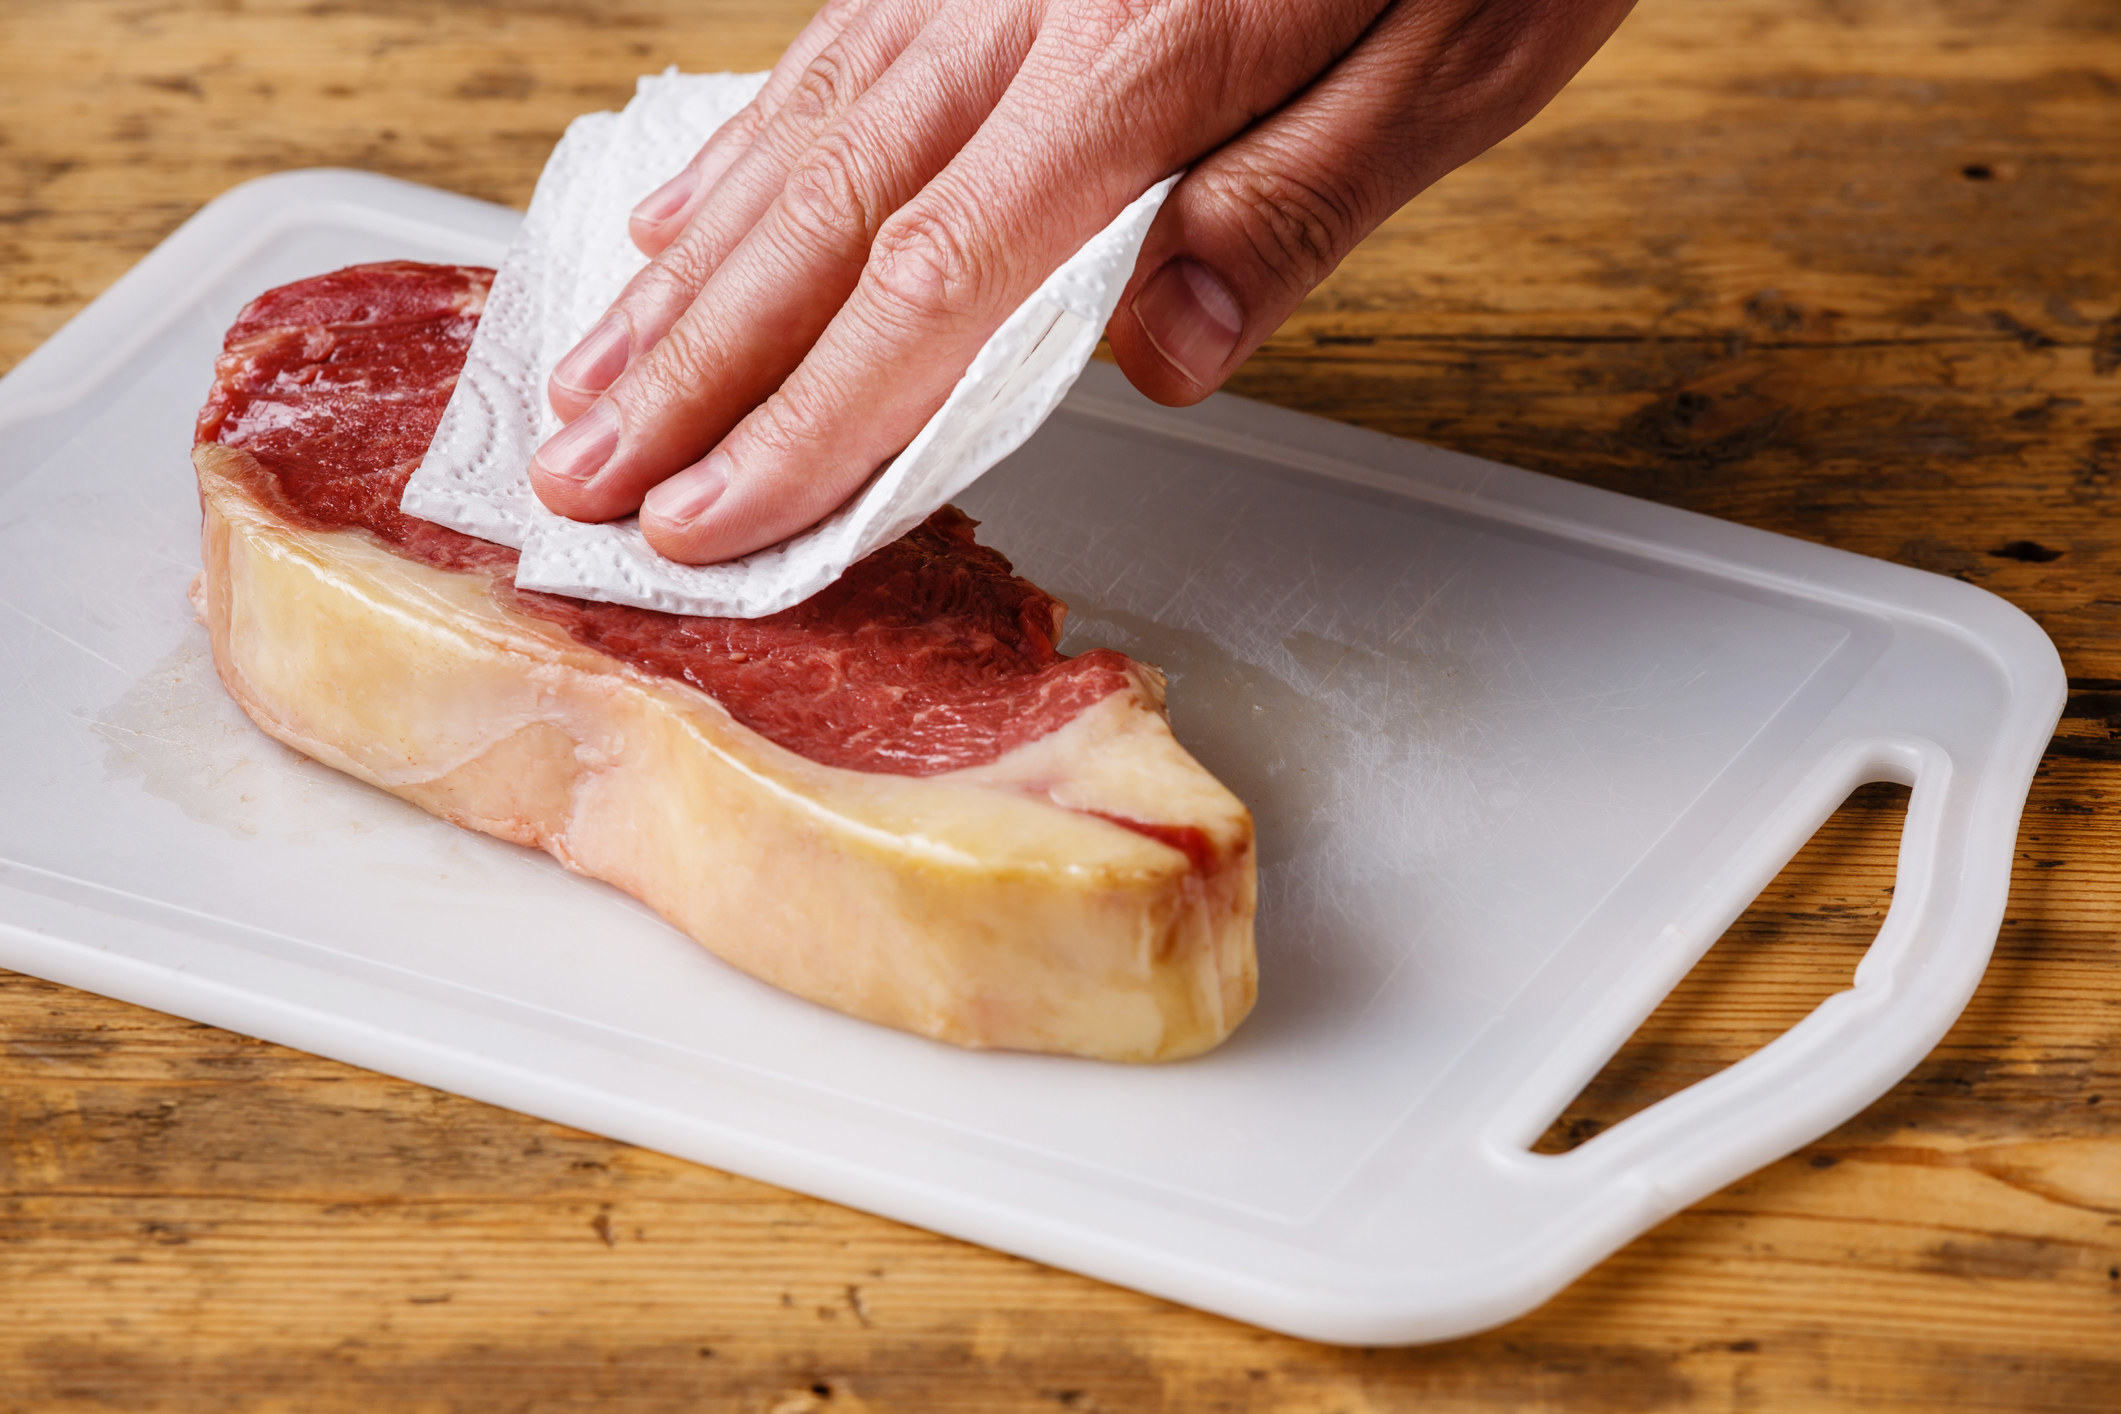 Patting down a piece of steak with paper towel